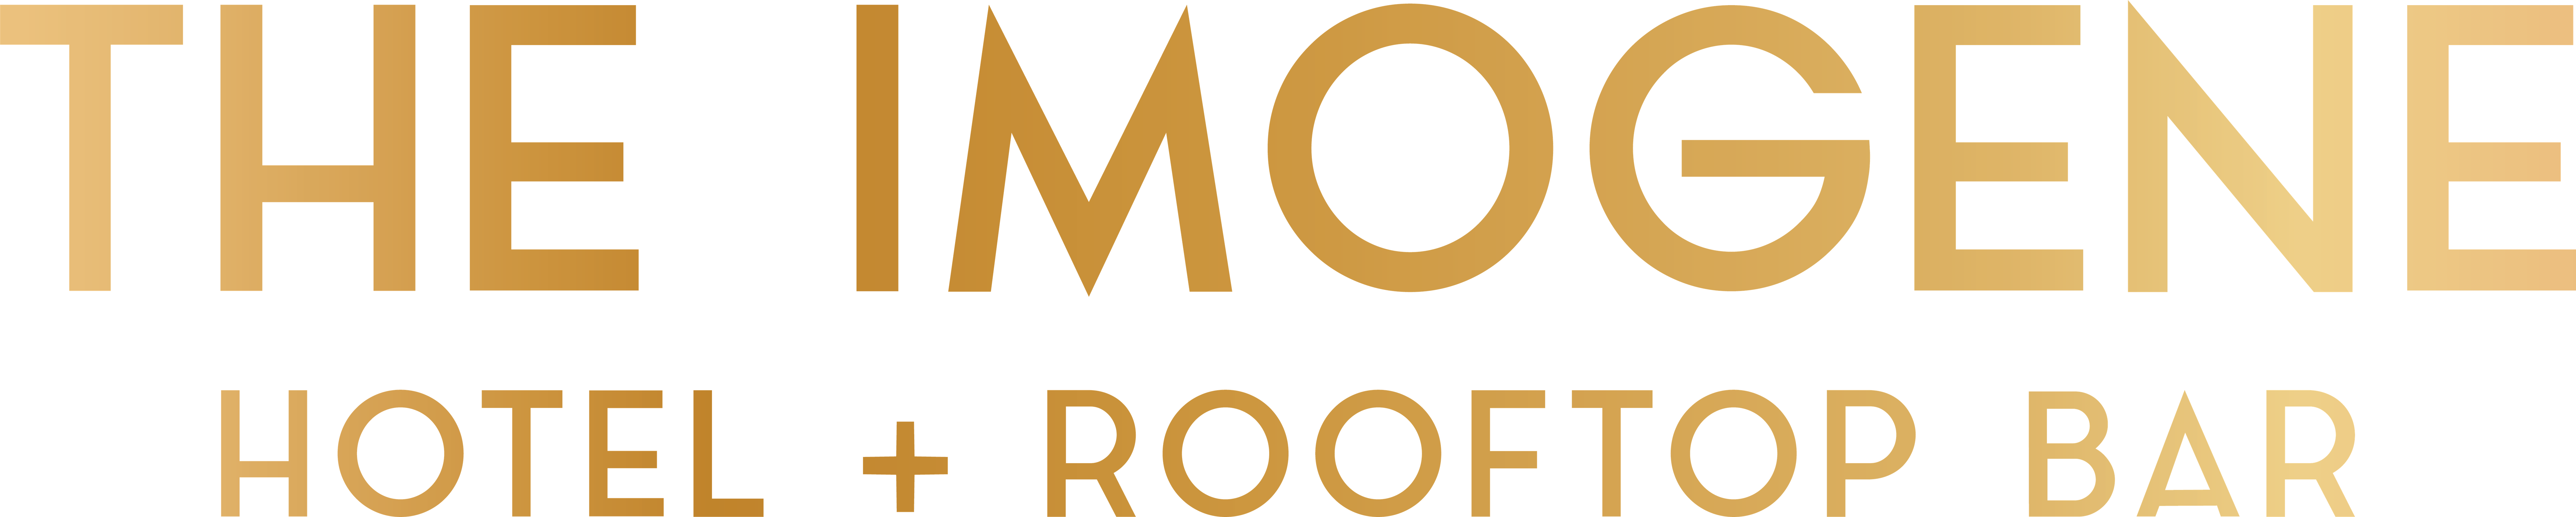 the imogene hotel and rooftop bar, logo